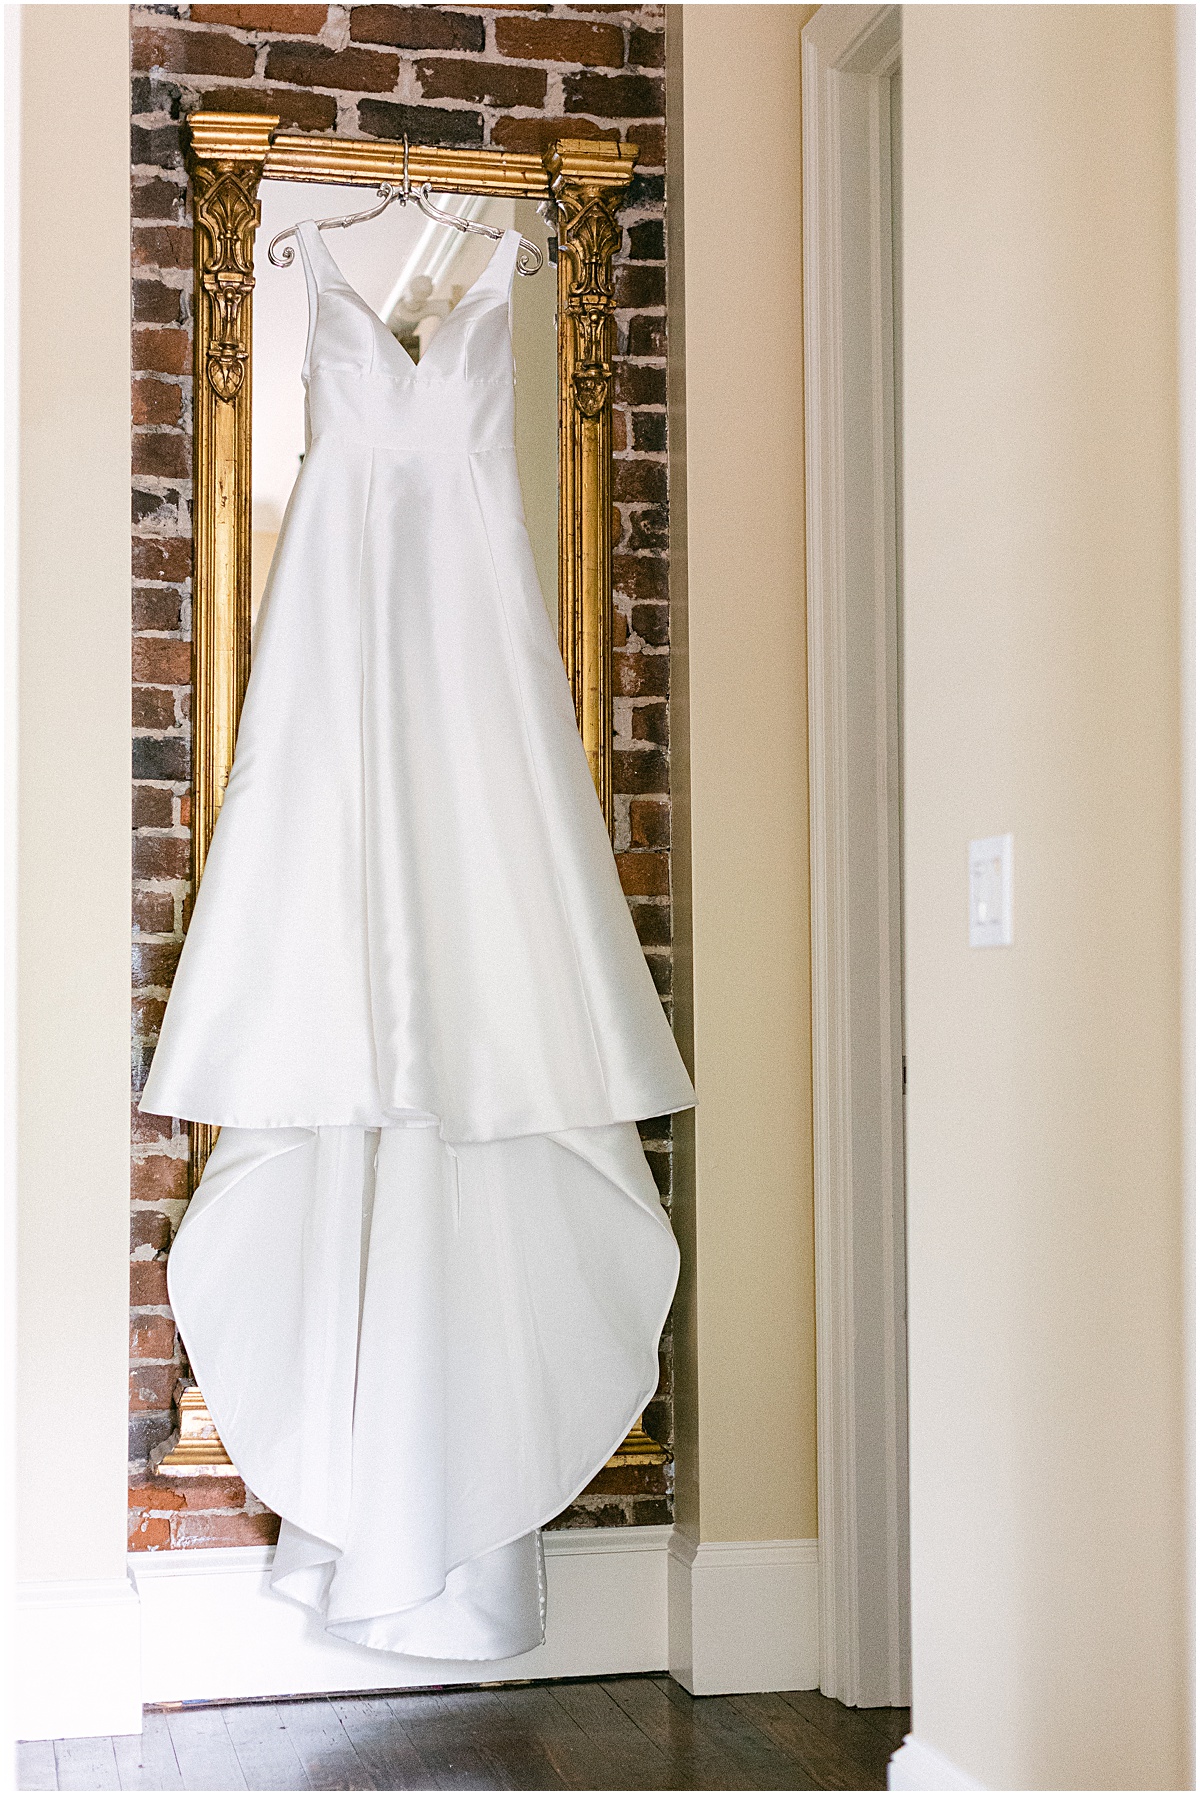 Monique Lhuillier Bridal Gown at Inn at Willow Grove.